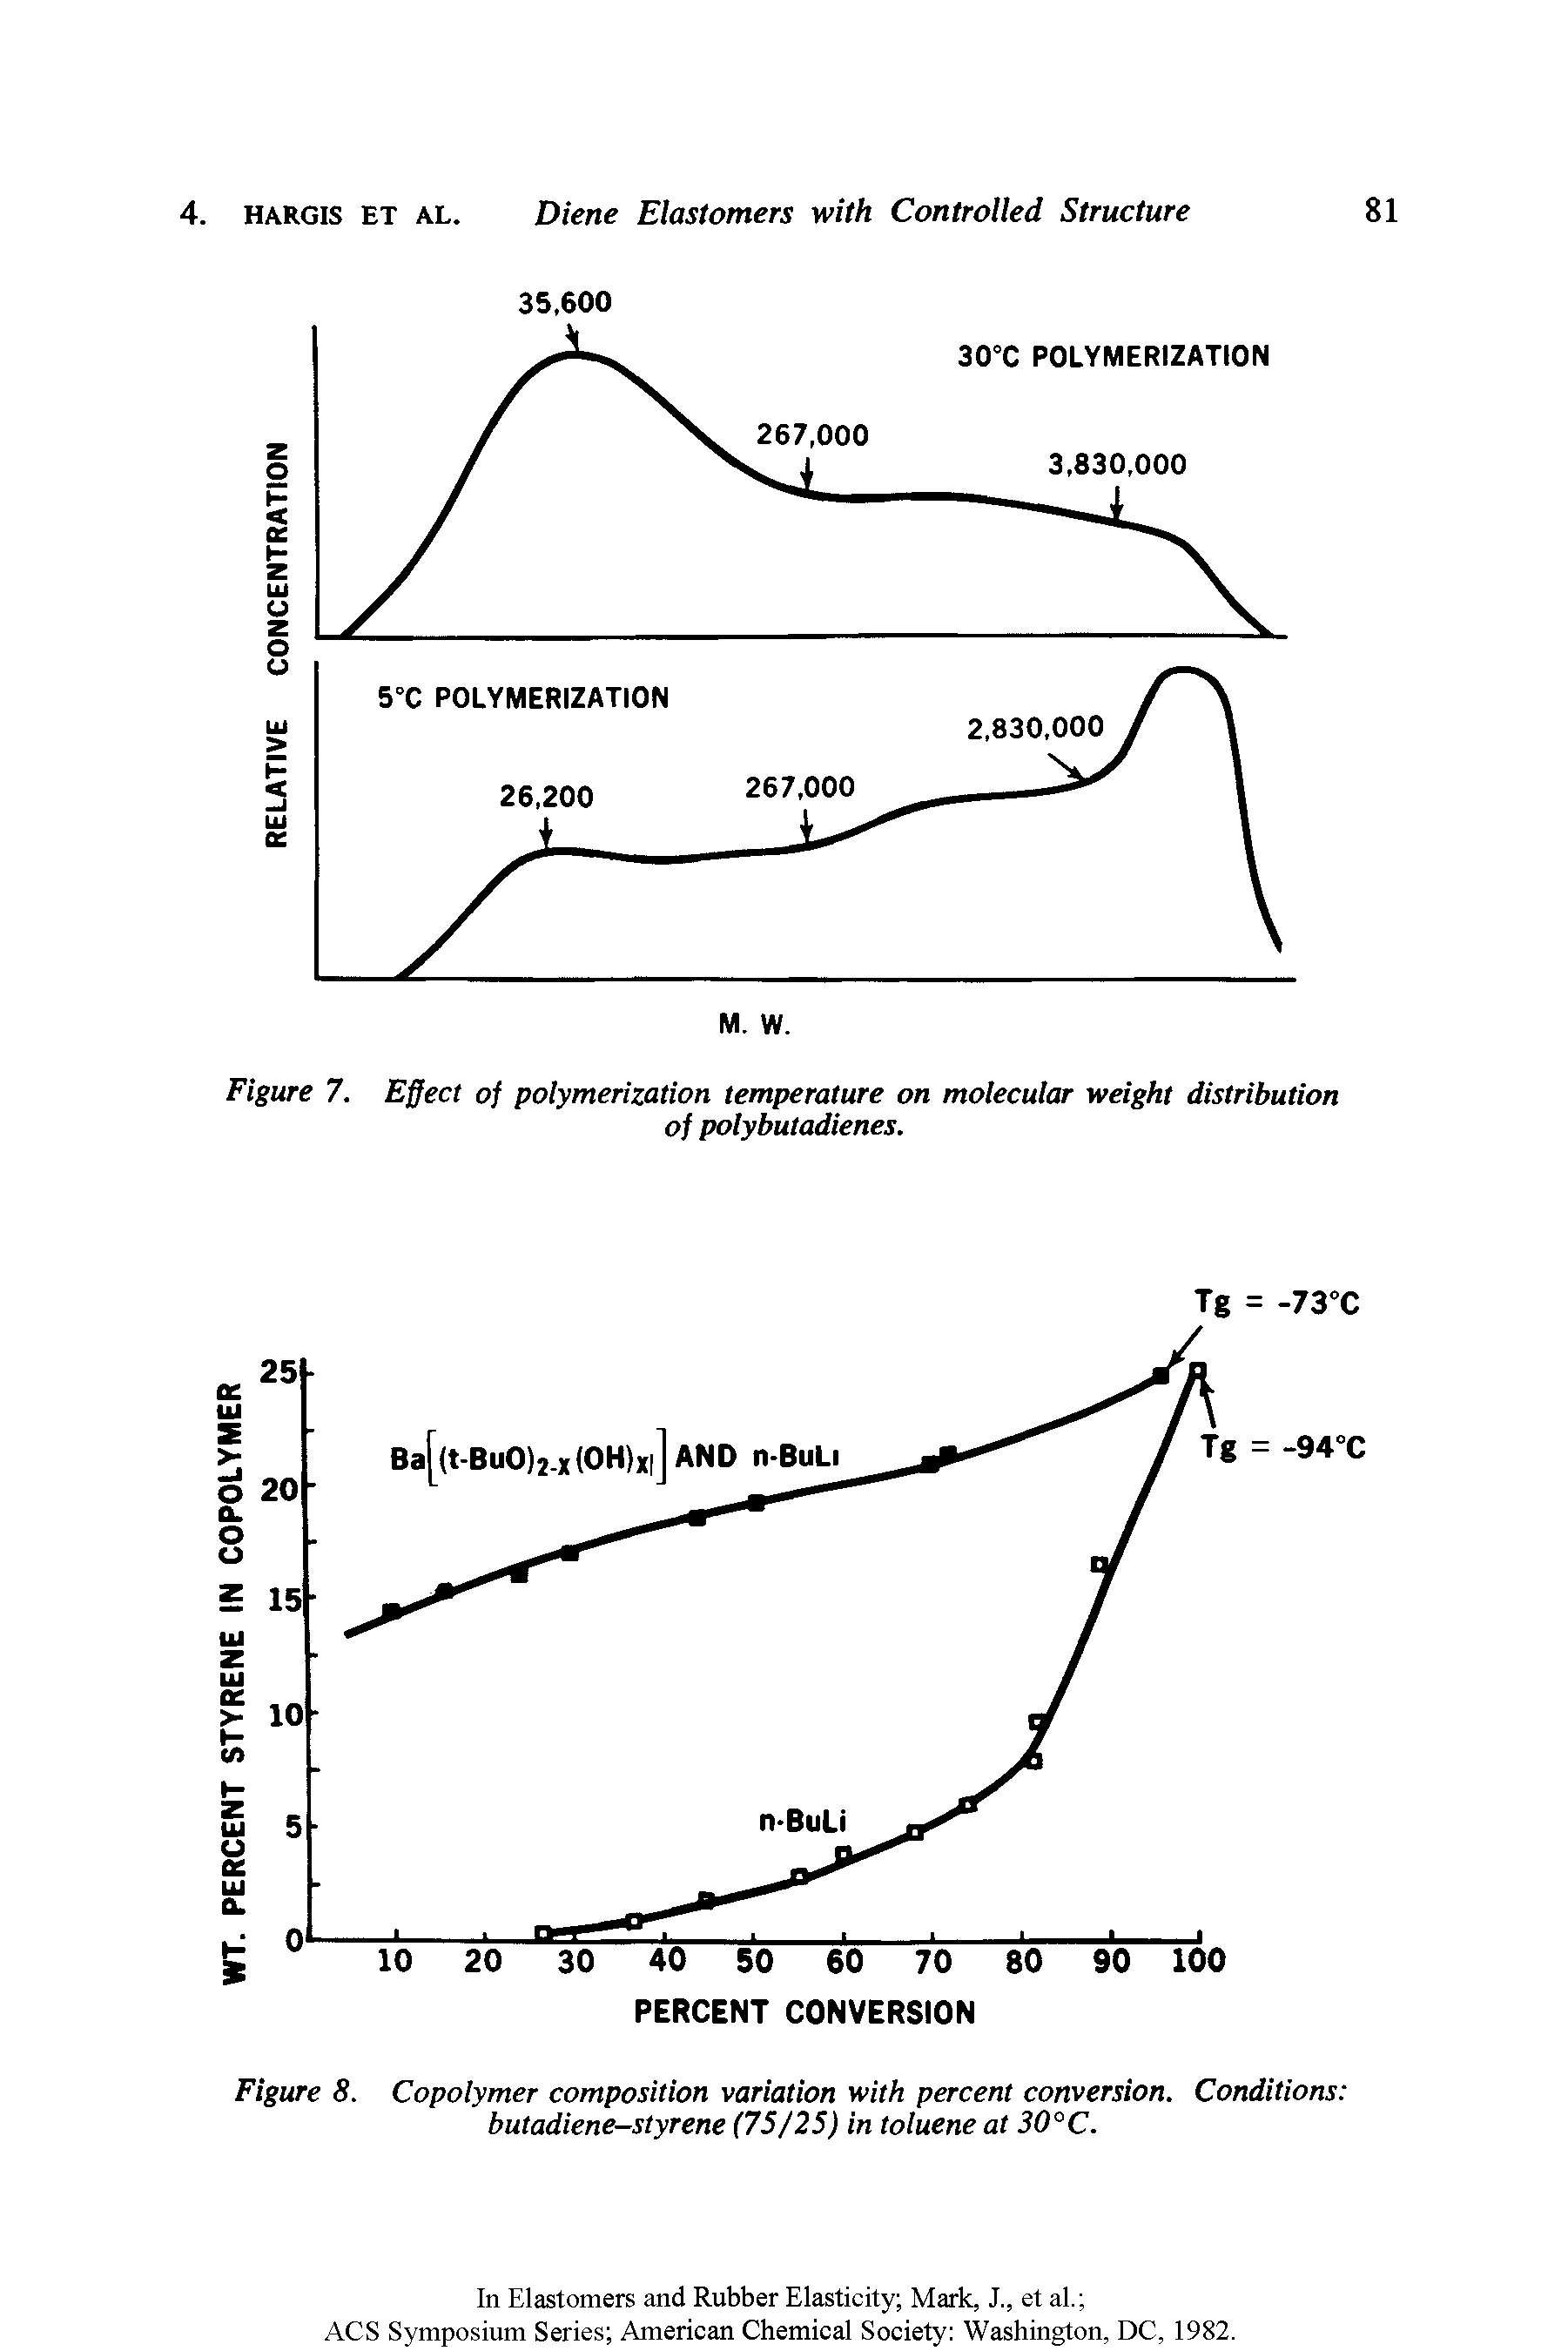 Figure 8. Copolymer composition variation with percent conversion. Conditions butadiene-styrene (75/25) in toluene at 30°C.